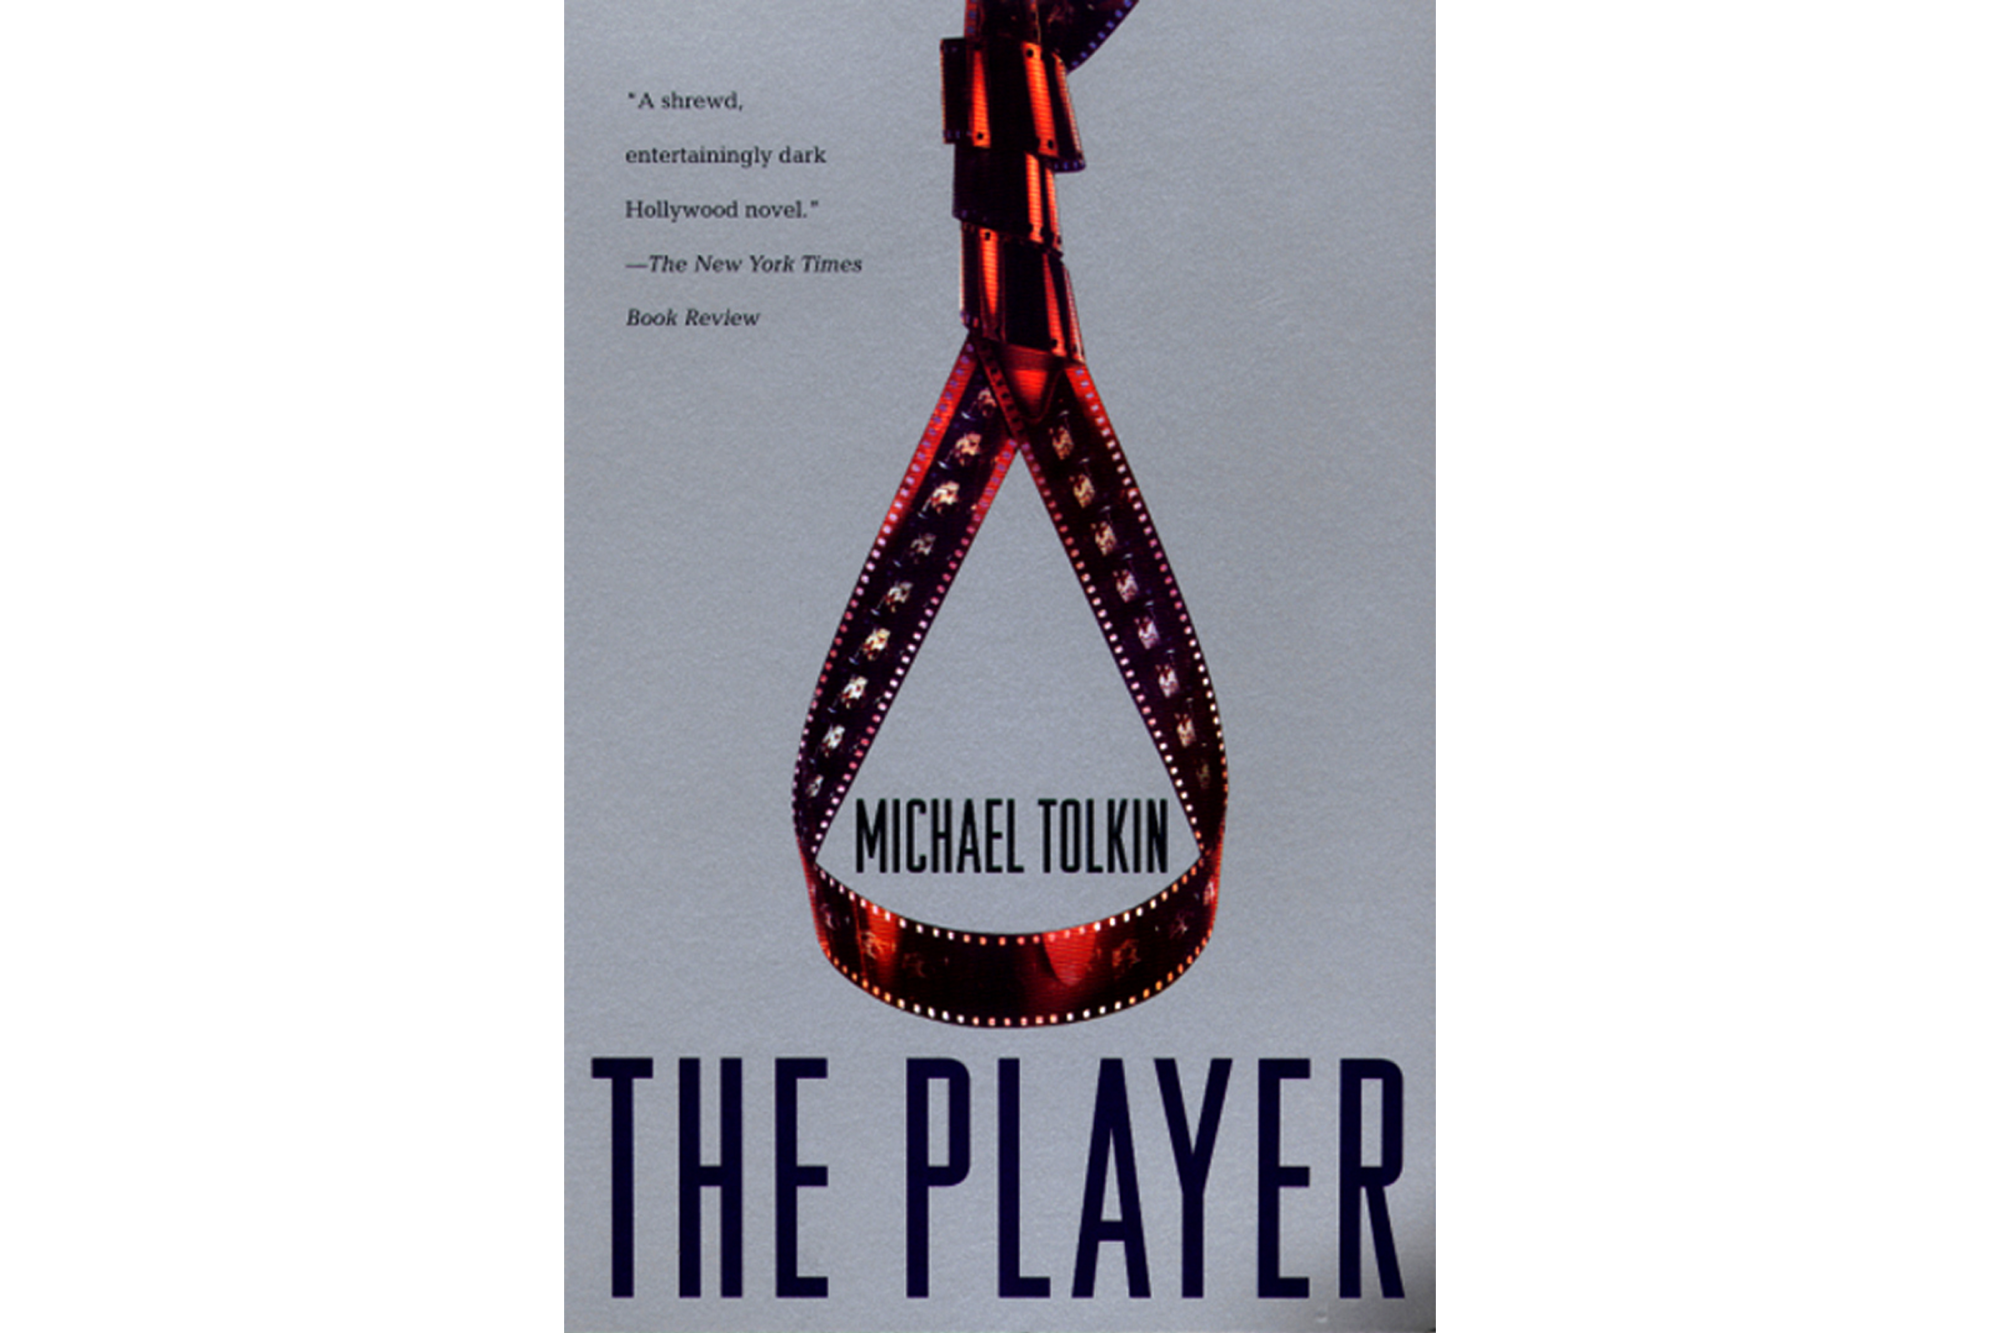 "The Player" by Michael Tolkin